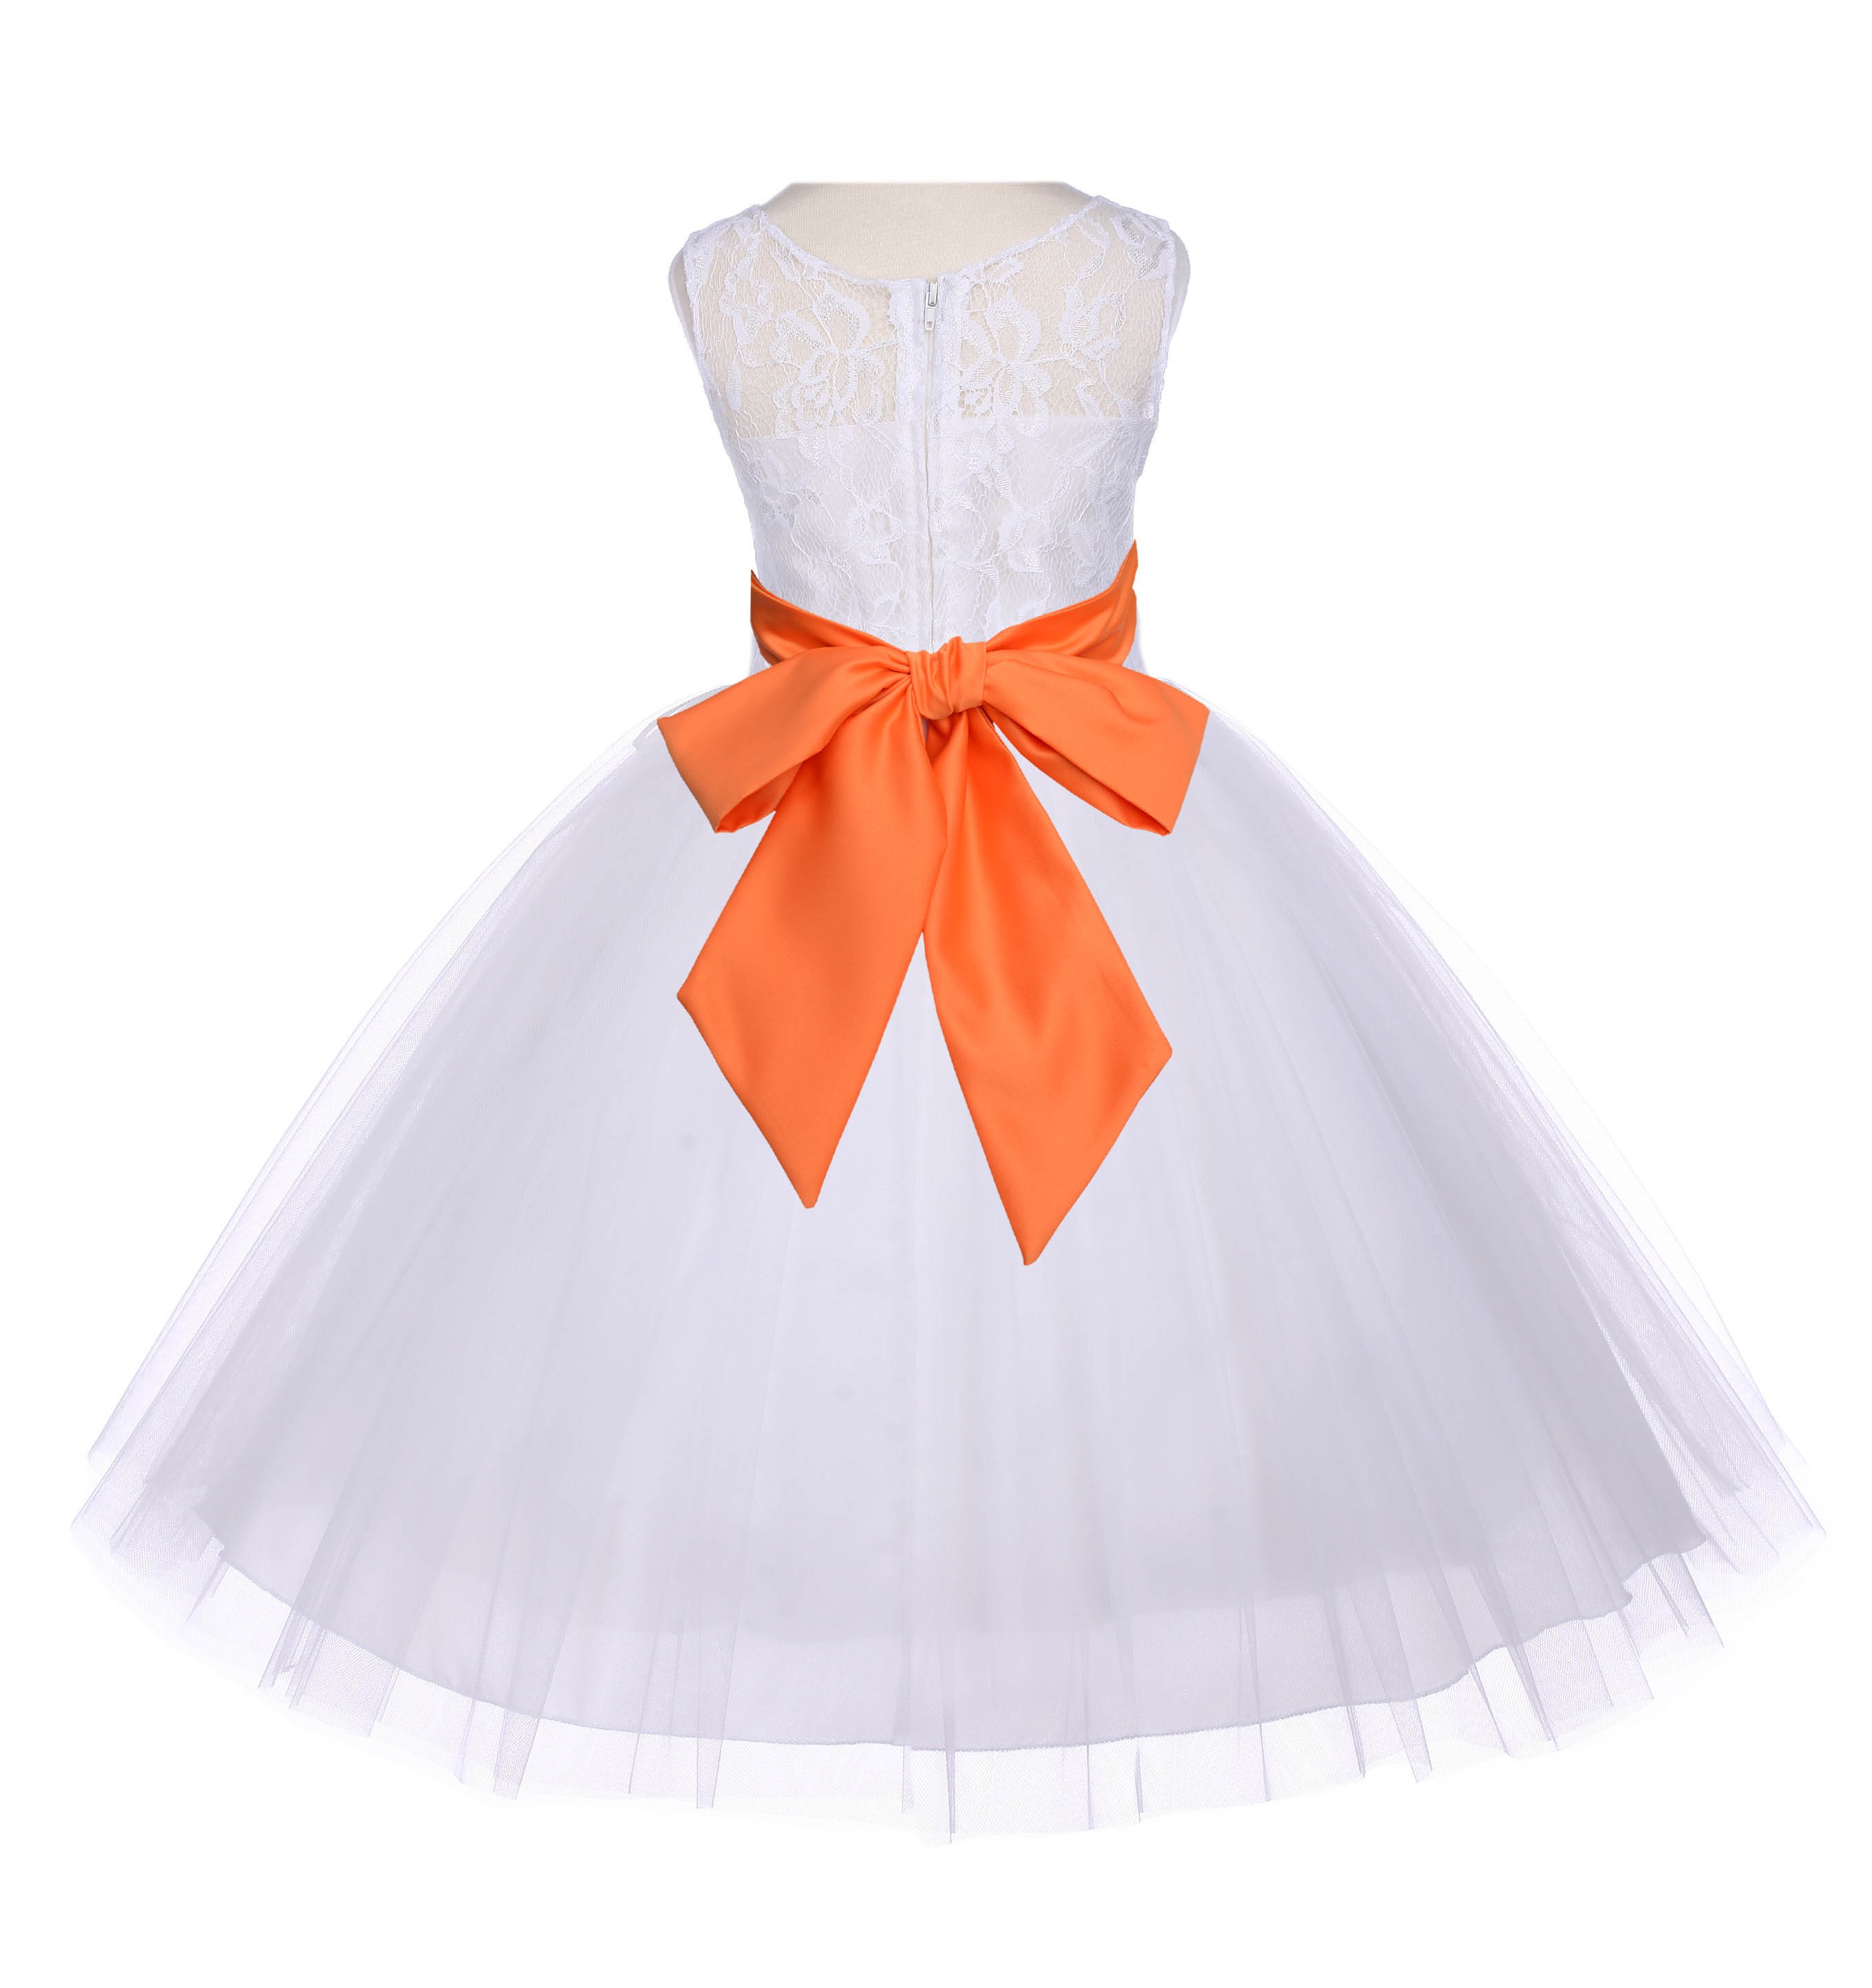 Ivory/Orange Floral Lace Bodice Tulle Flower Girl Dress Bridesmaid 153S